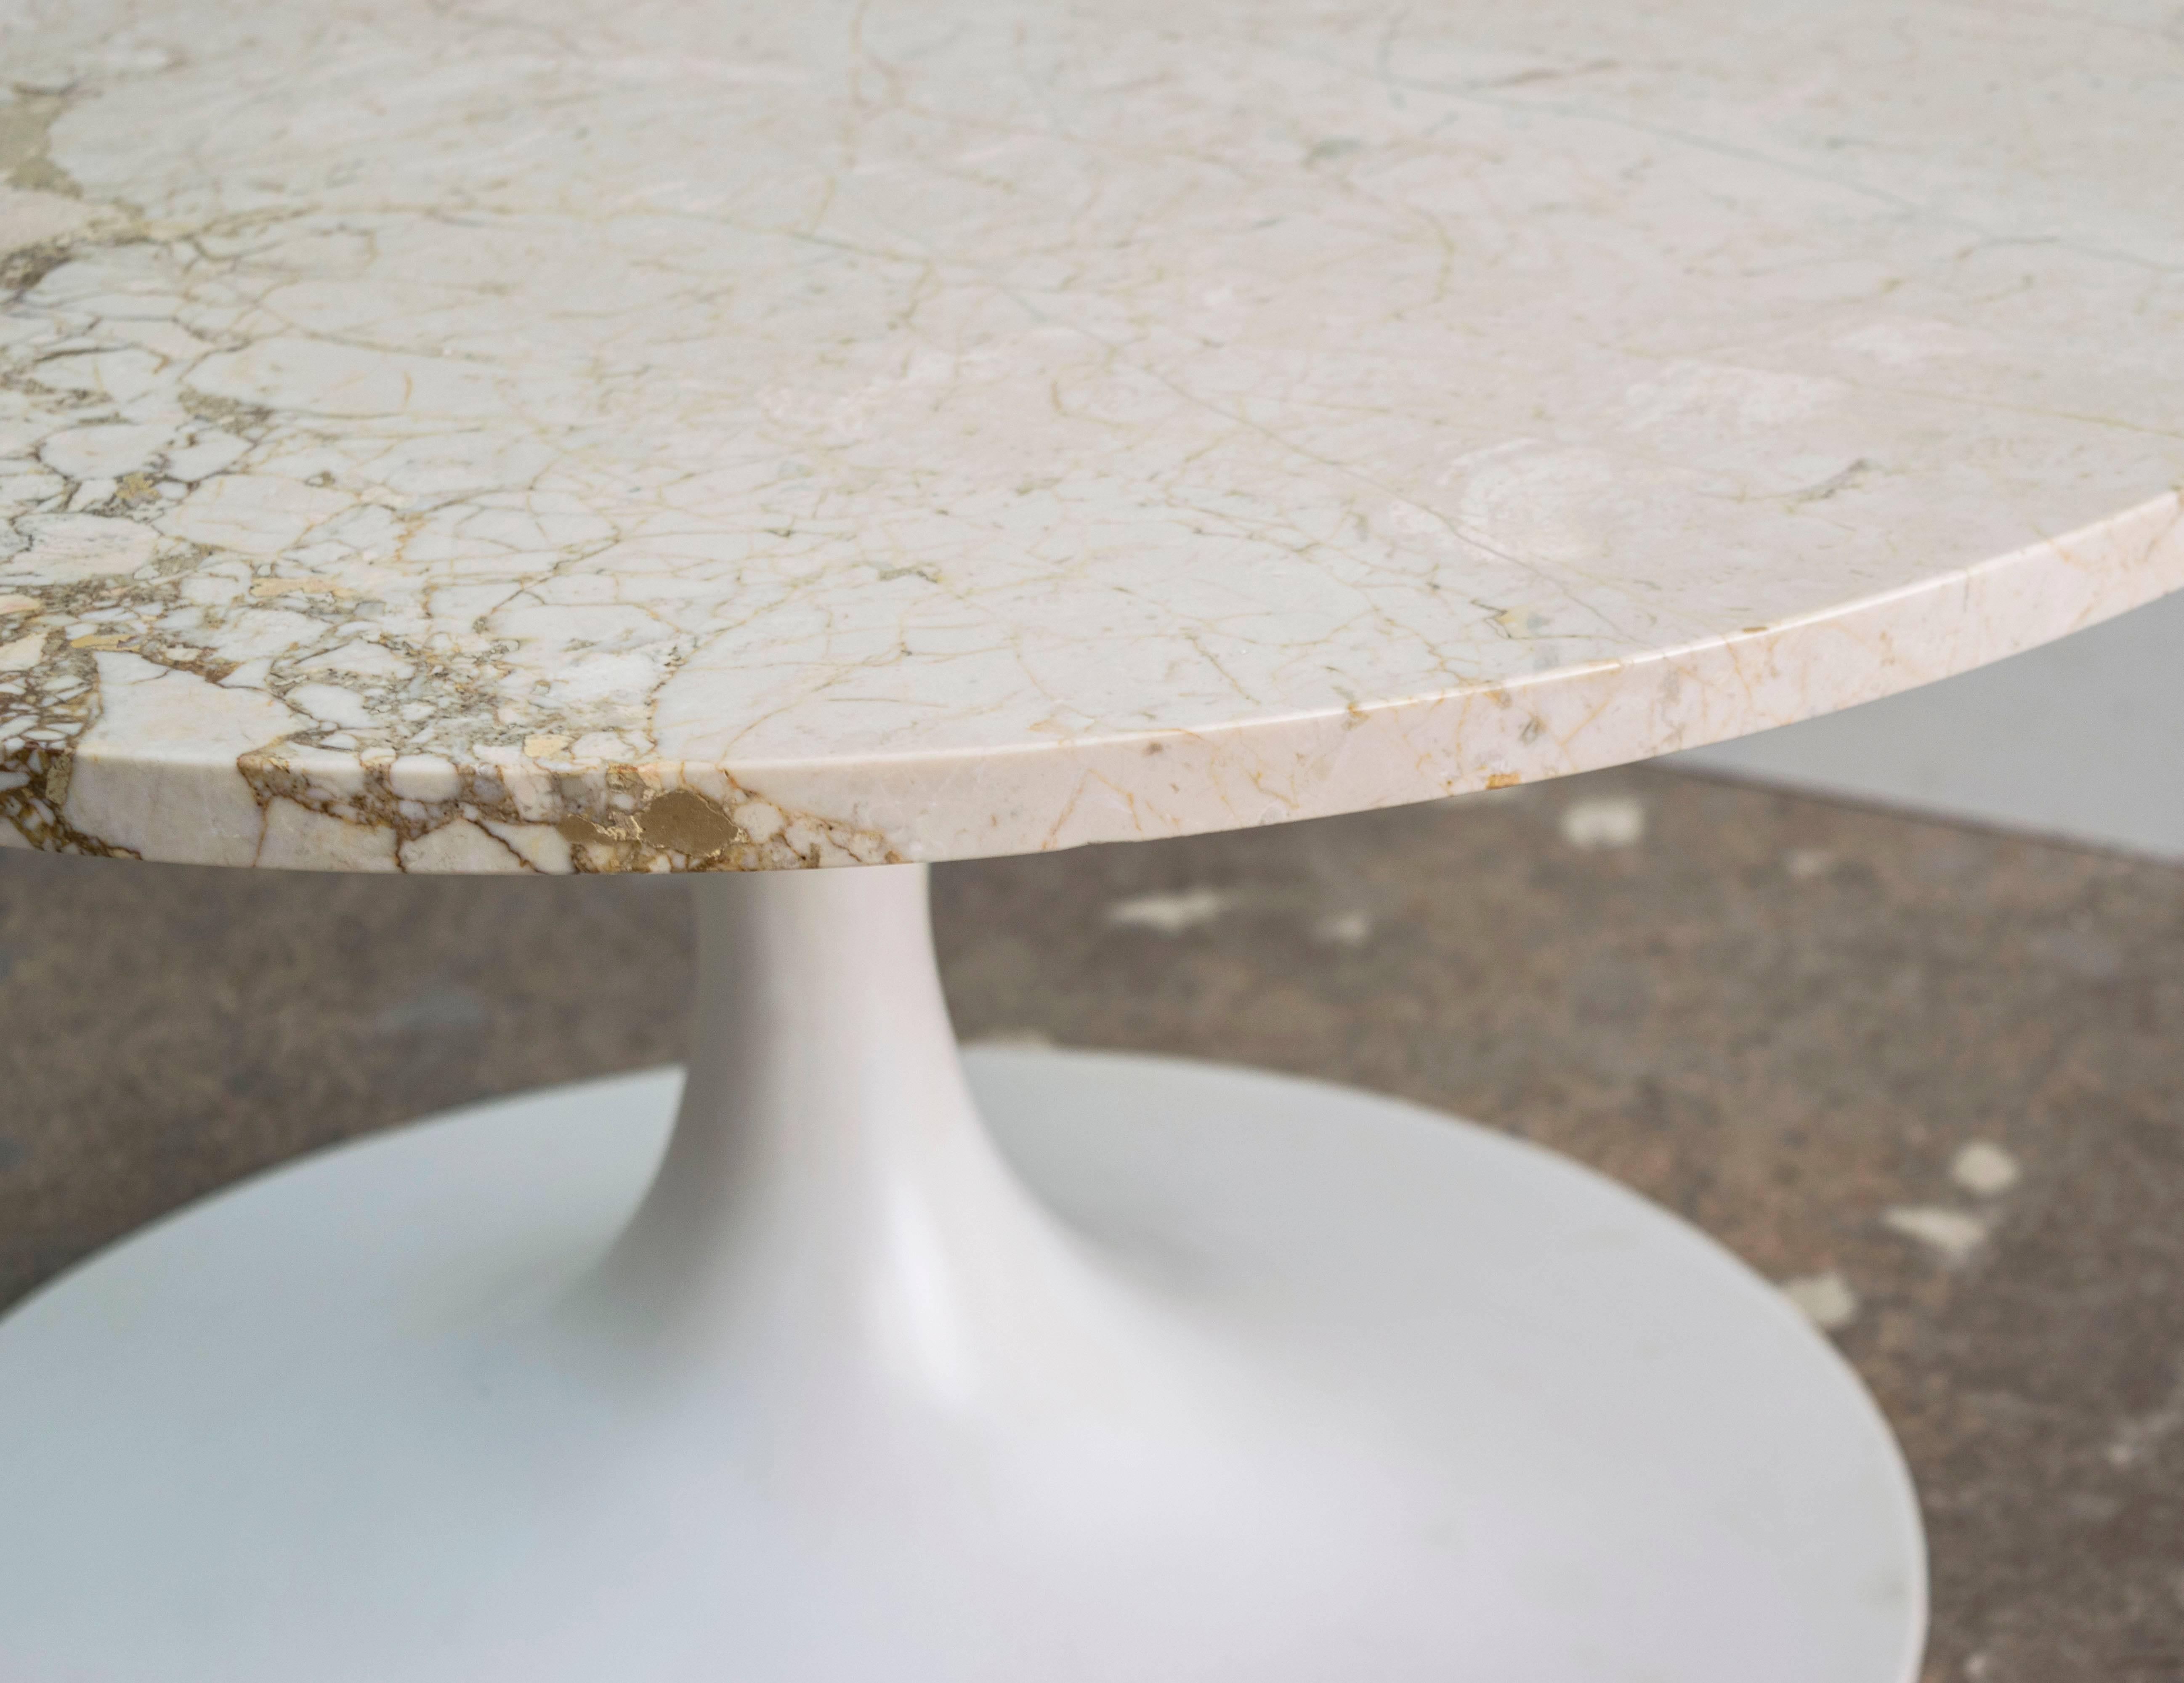 Beautiful 1960s Saarinen tulip coffee table by Burke. Coated aluminum base and travertine top excellent condition and perfect for any interior.